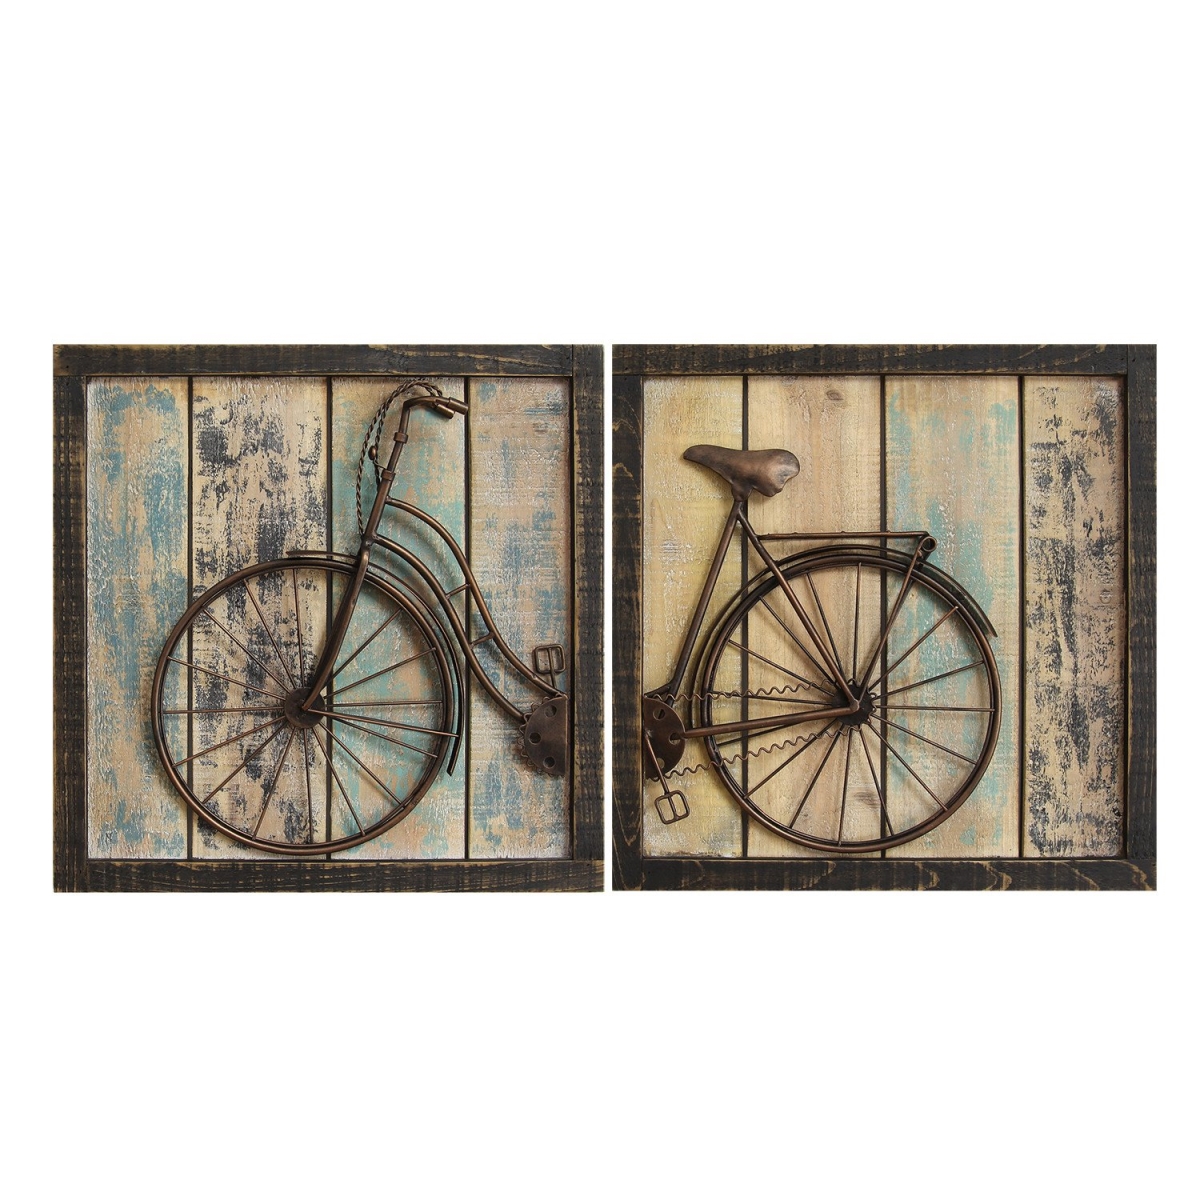 Home Roots 321062 Rustic Bicycle Wall Decor, Multicolor - Set Of 2